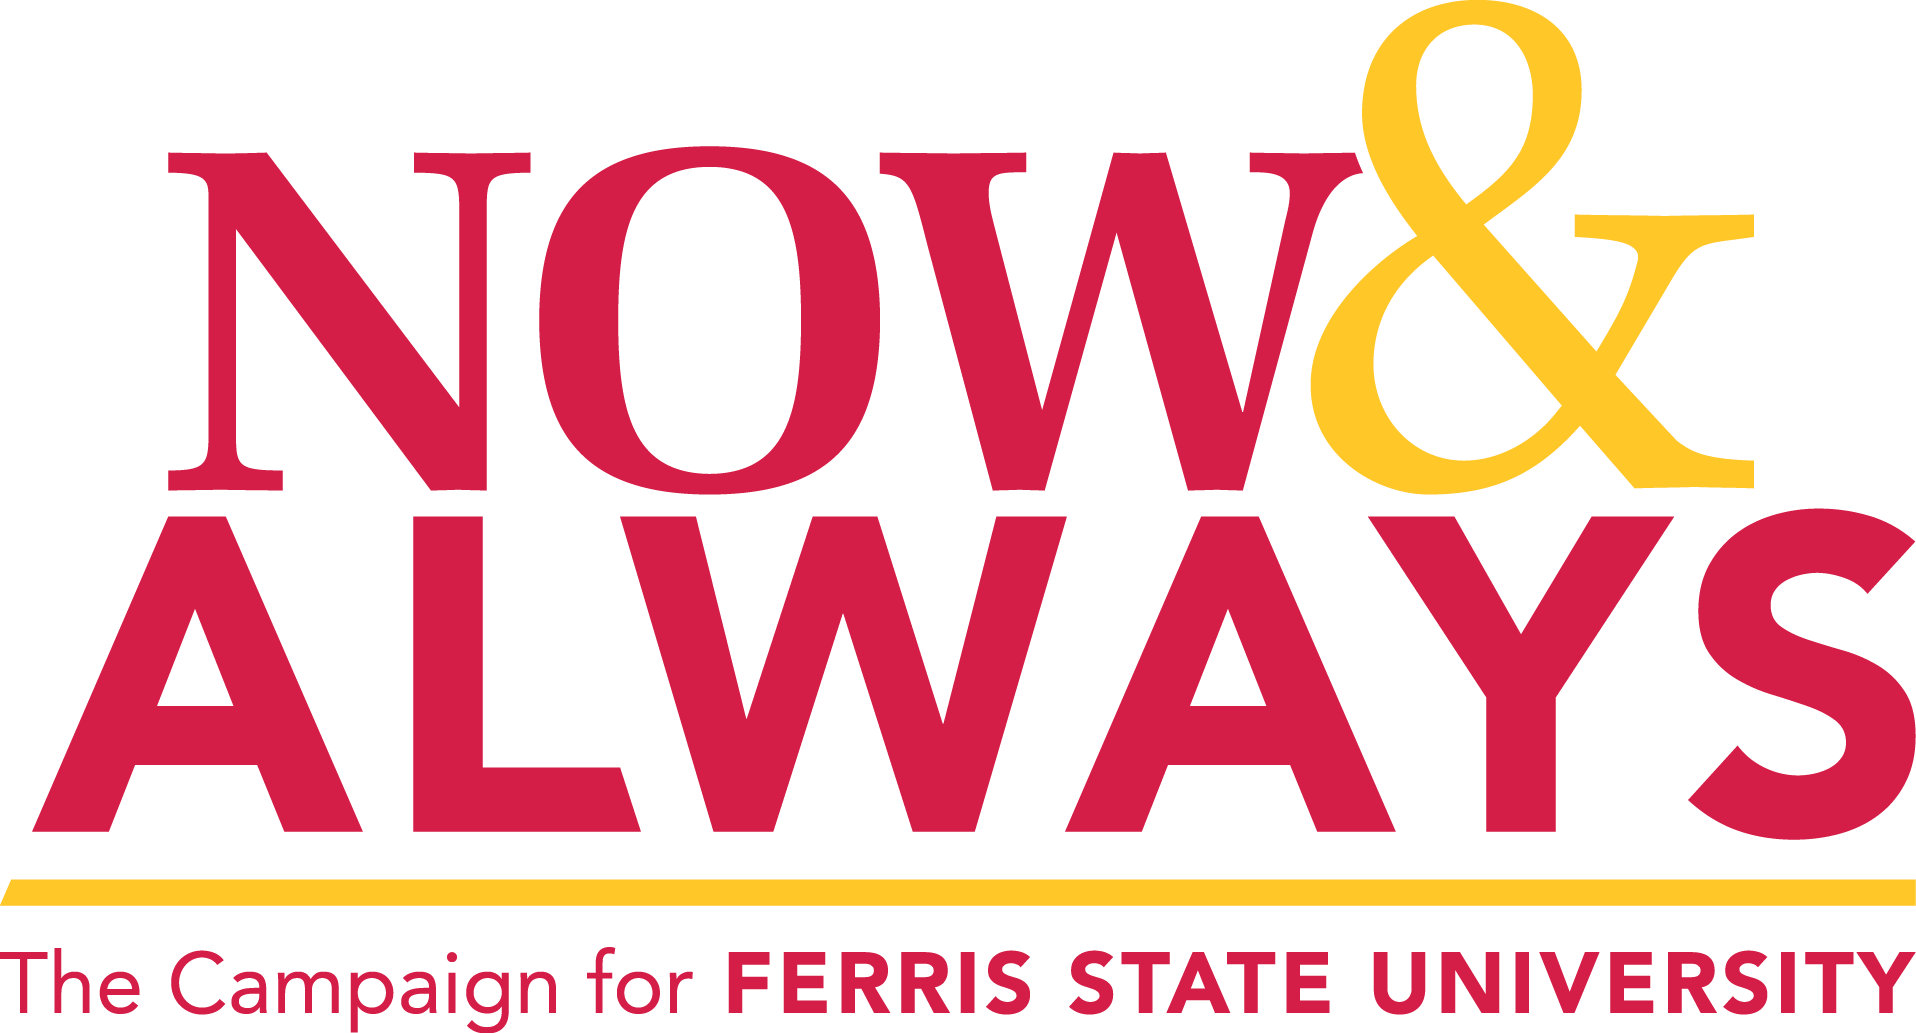 Now & Always, The Campaigin for Ferris State University